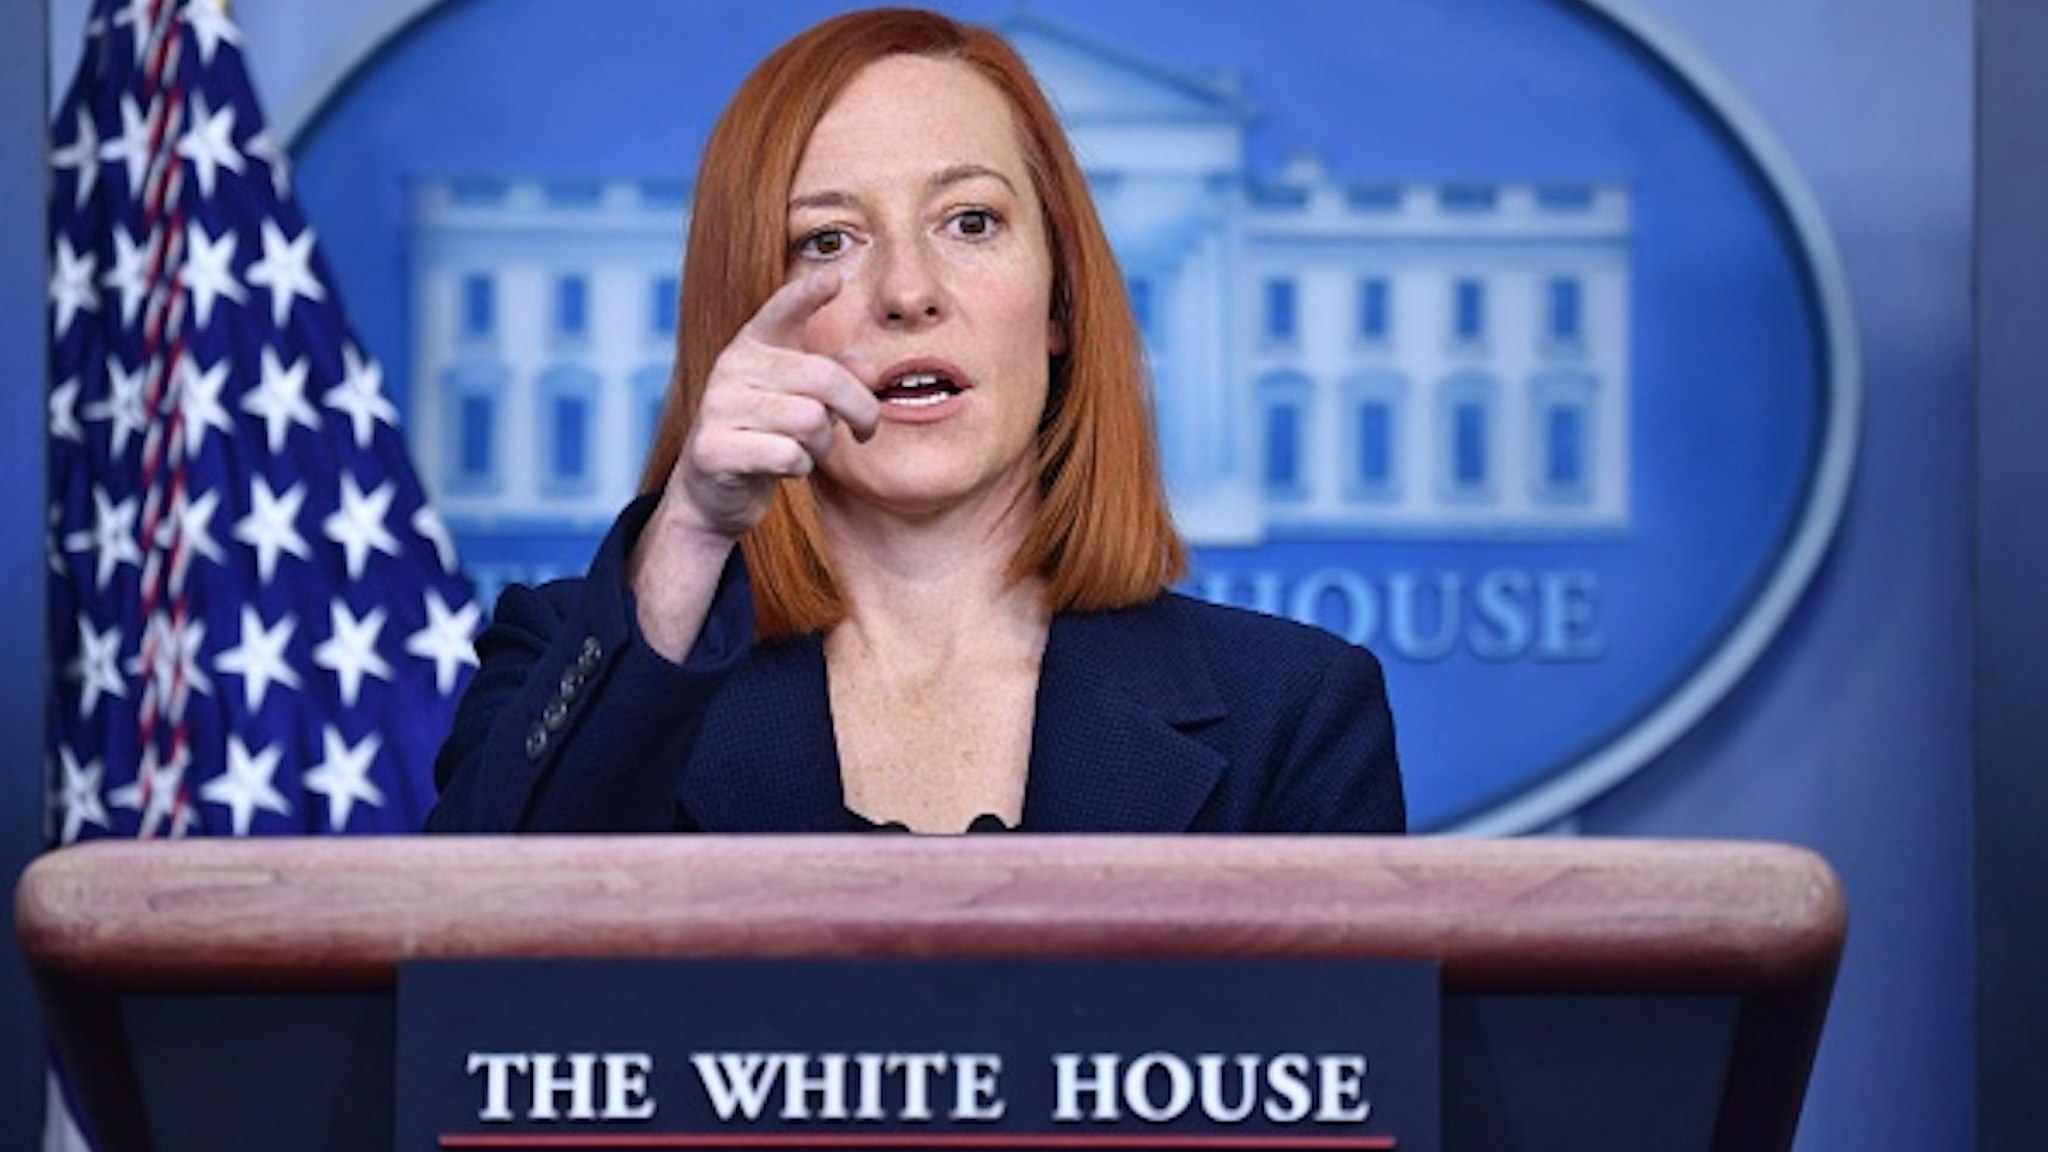 White House Press Secretary Jen Psaki takes a question during a press briefing on January 29, 2021, in the Brady Briefing Room of the White House in Washington, DC.